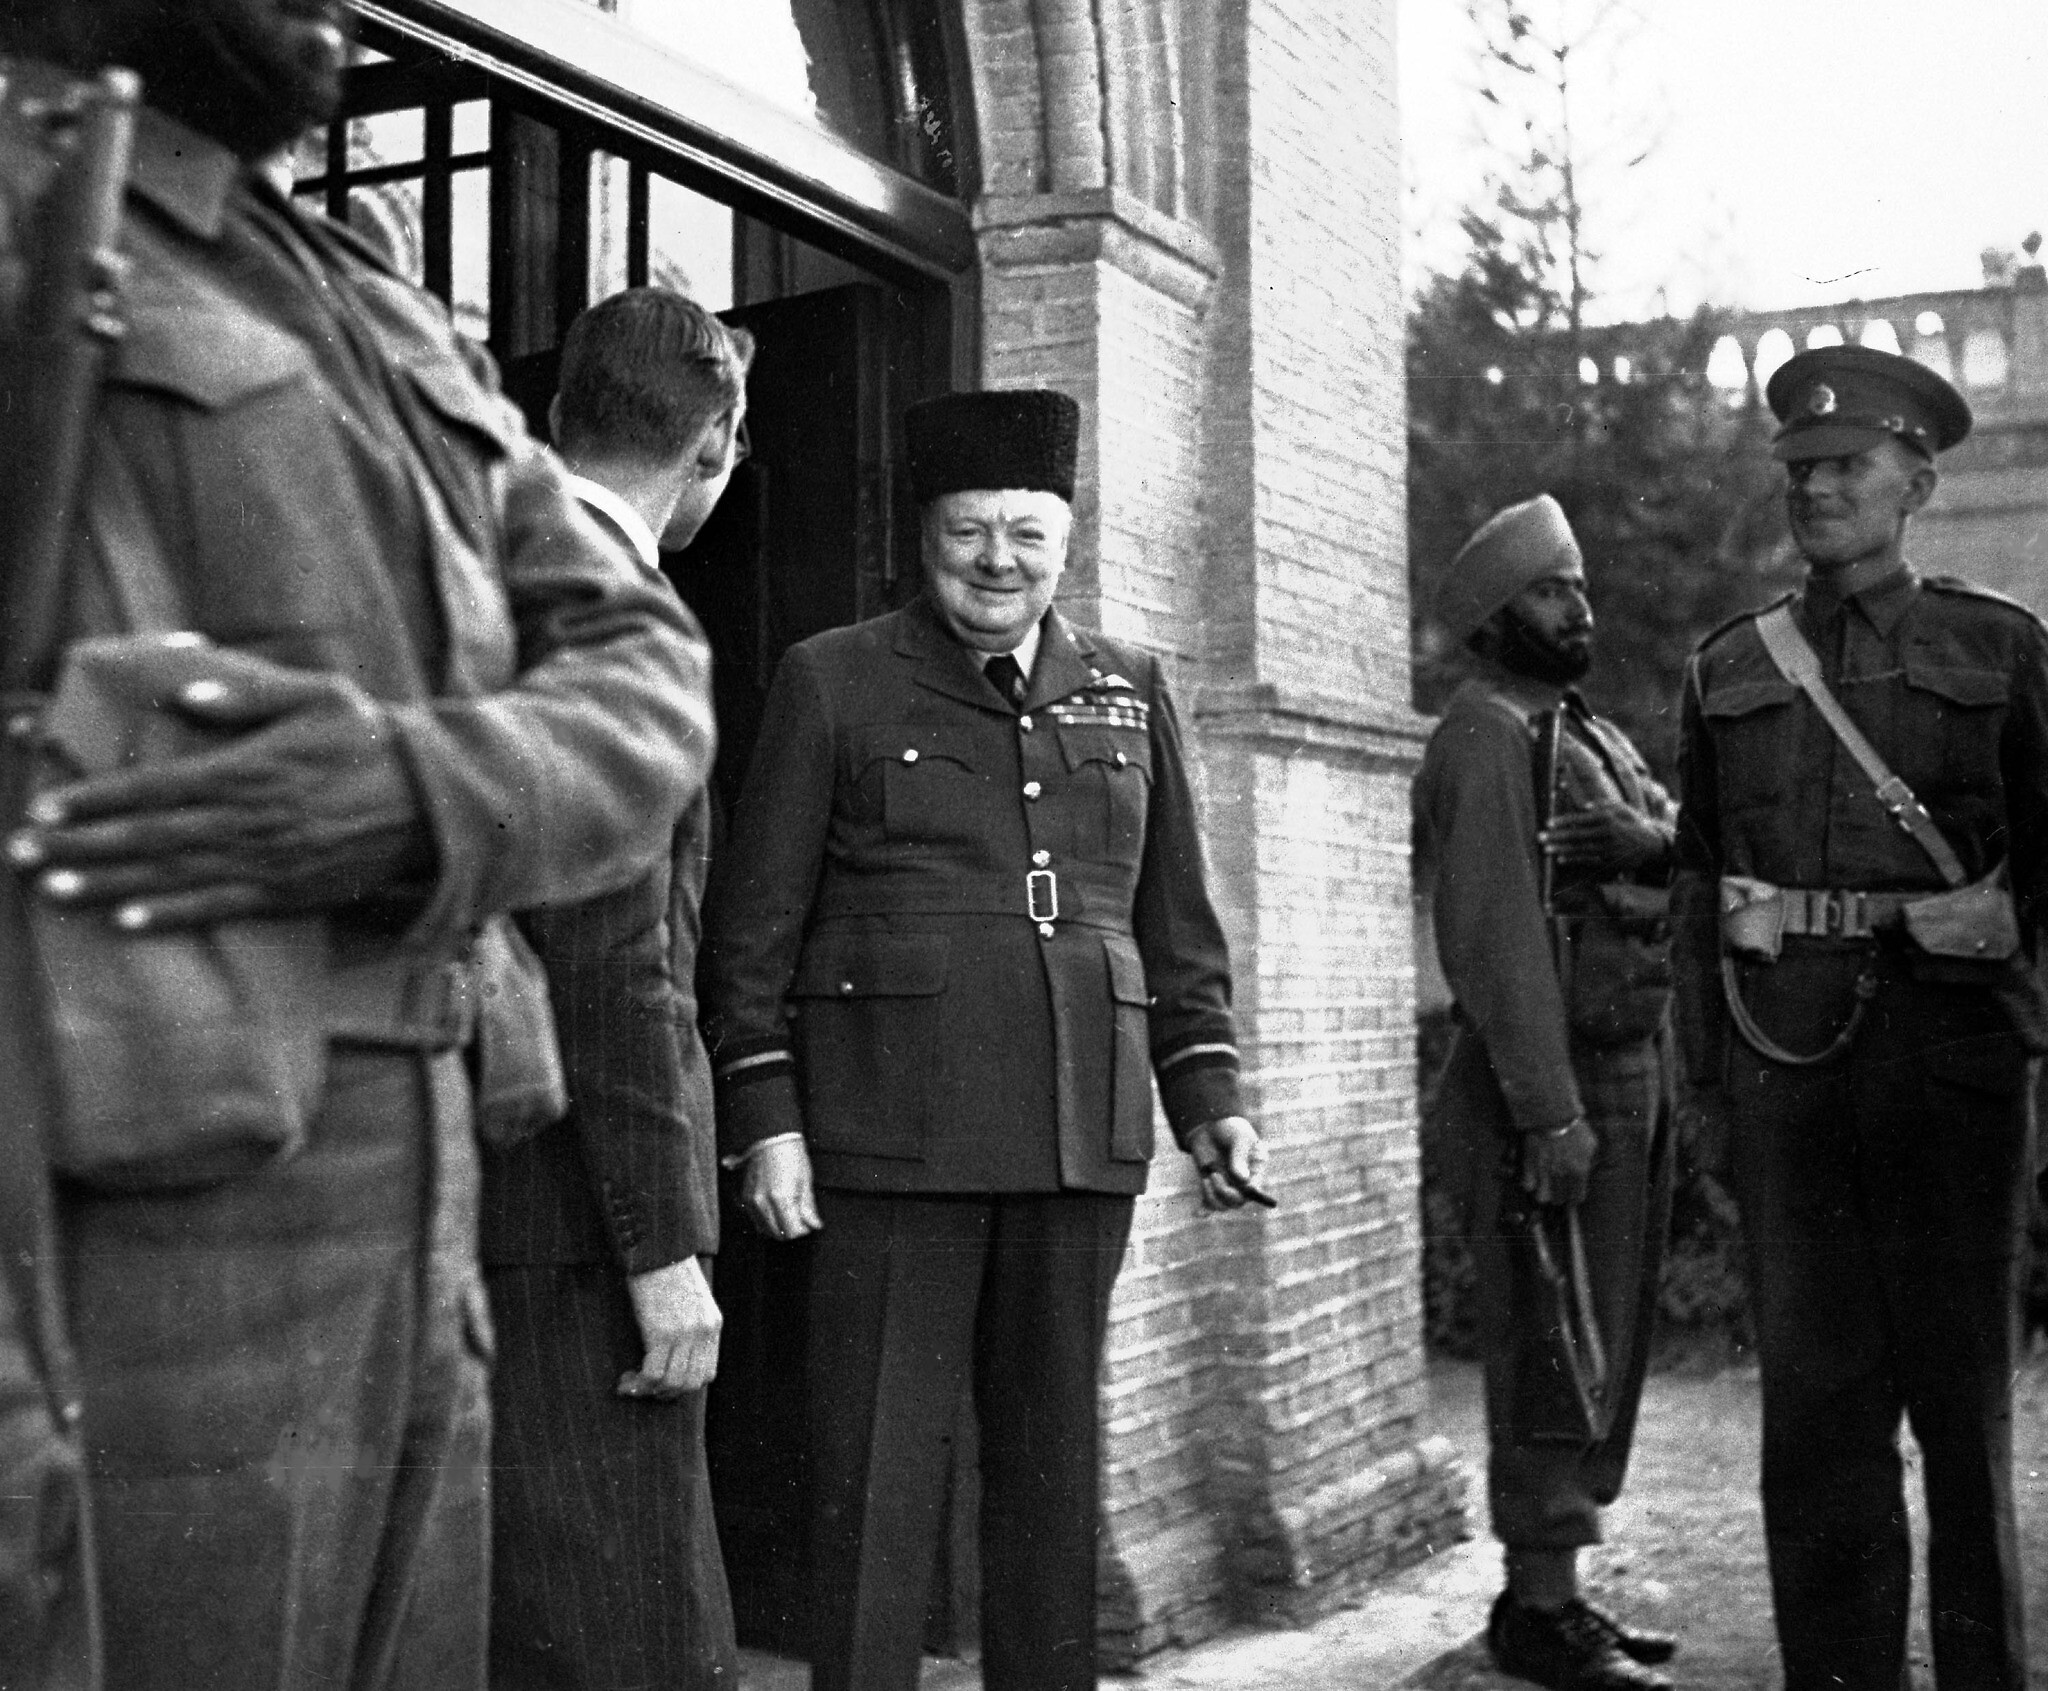 Winston Churchill wears a caracul hat, presented to him by the British Press Unit to mark his 69th birthday in Tehran, Iran, November 30, 1943. (AP Photo)